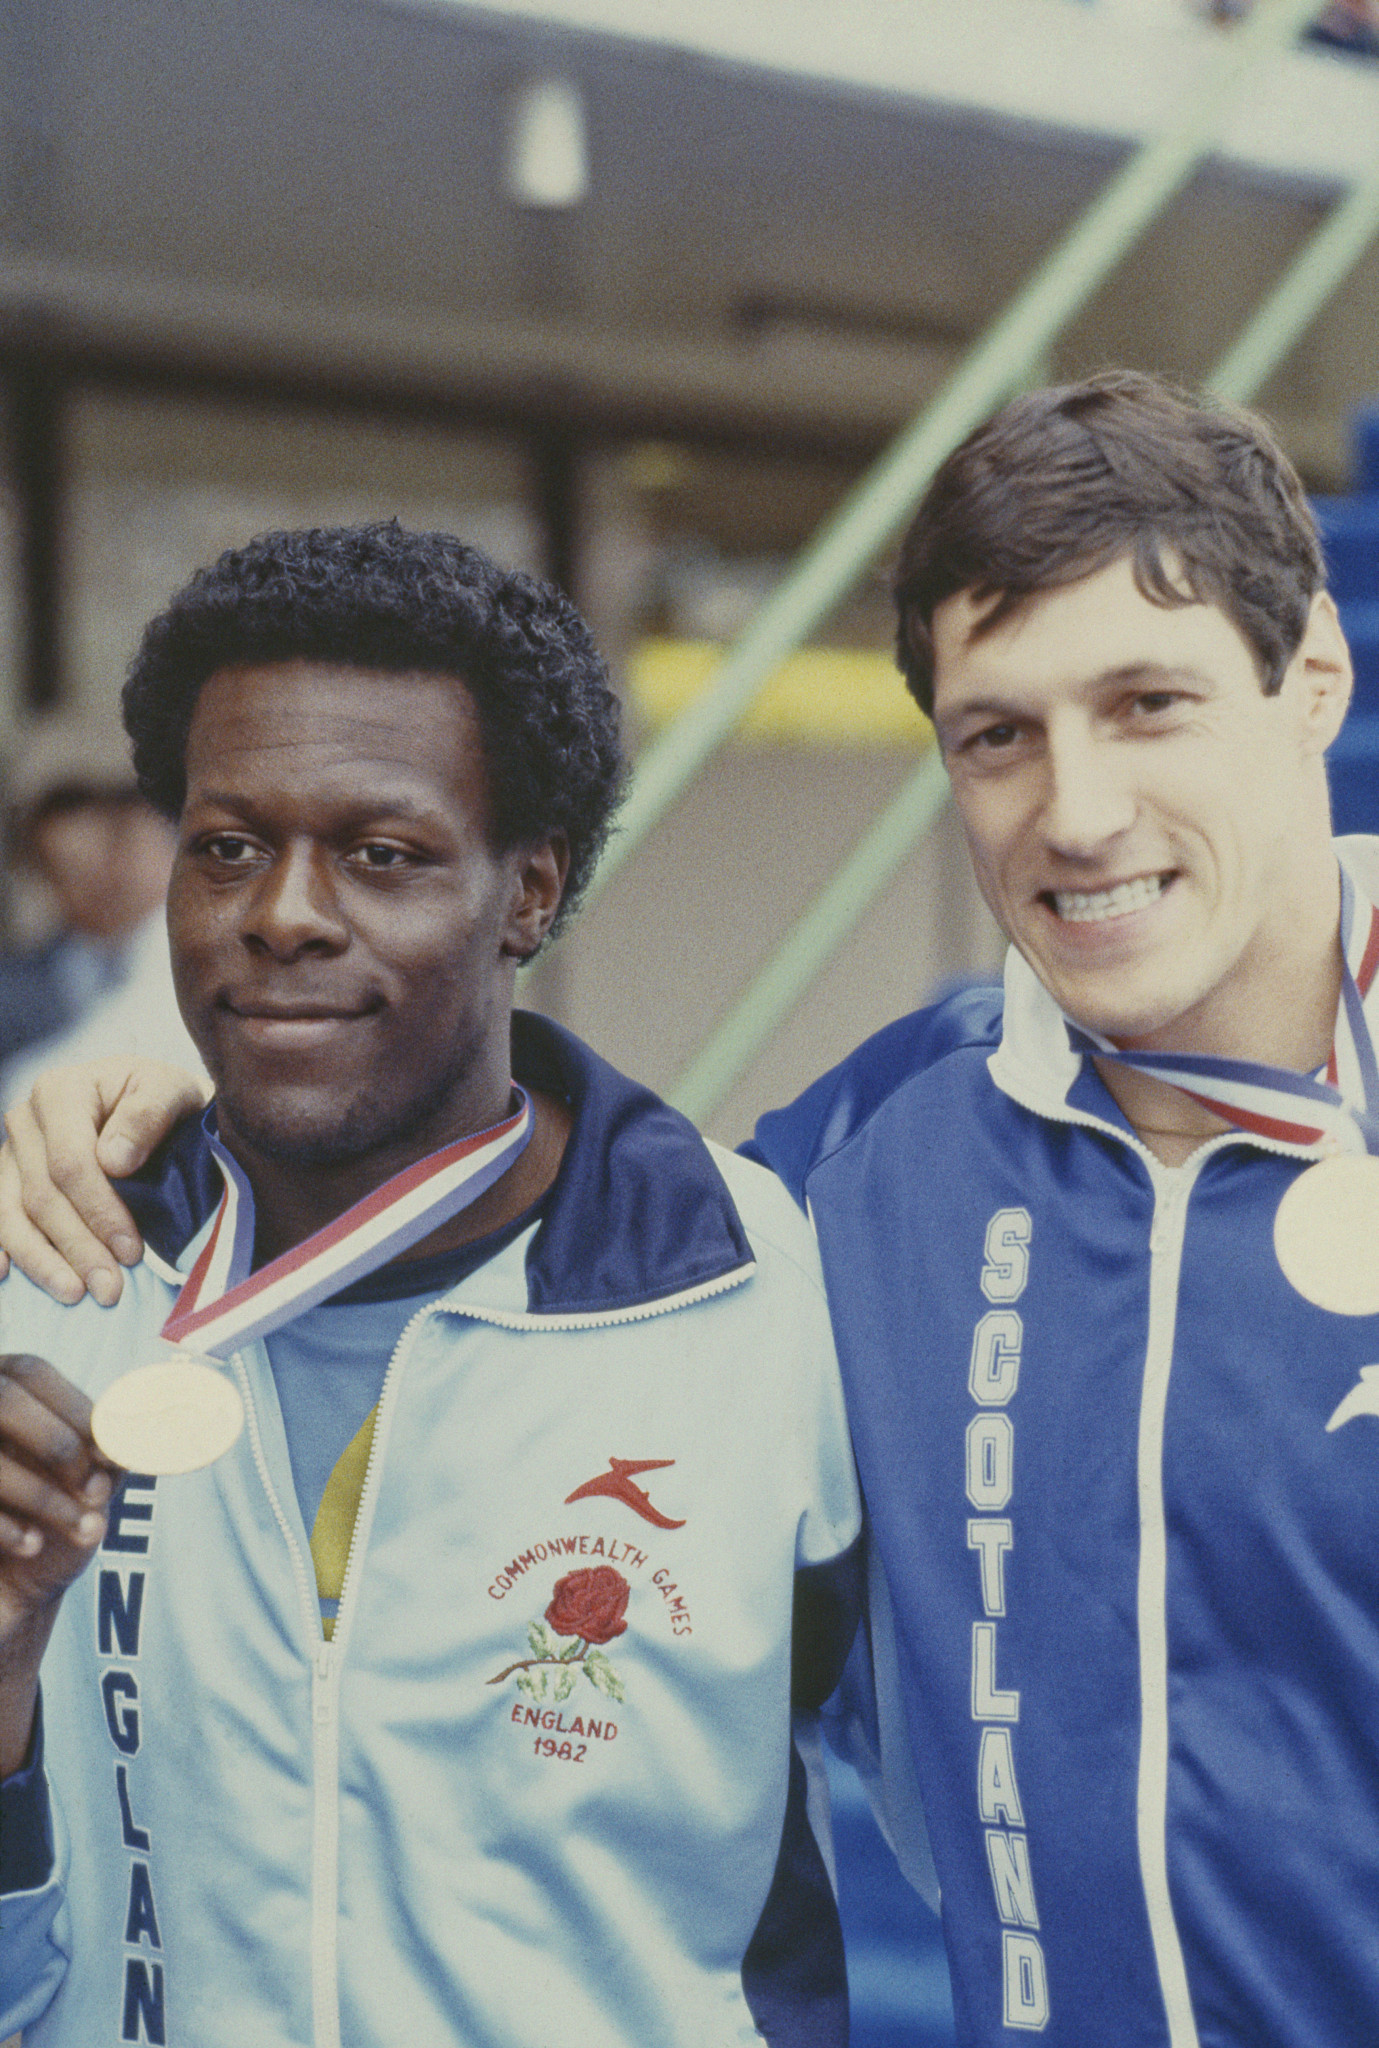 Mike McFarlane will possibly be best remembered for sharing the 1982 Commonwealth 200m title with Scotland's reigning Olympic 100m champion Allan Wells ©Getty Images